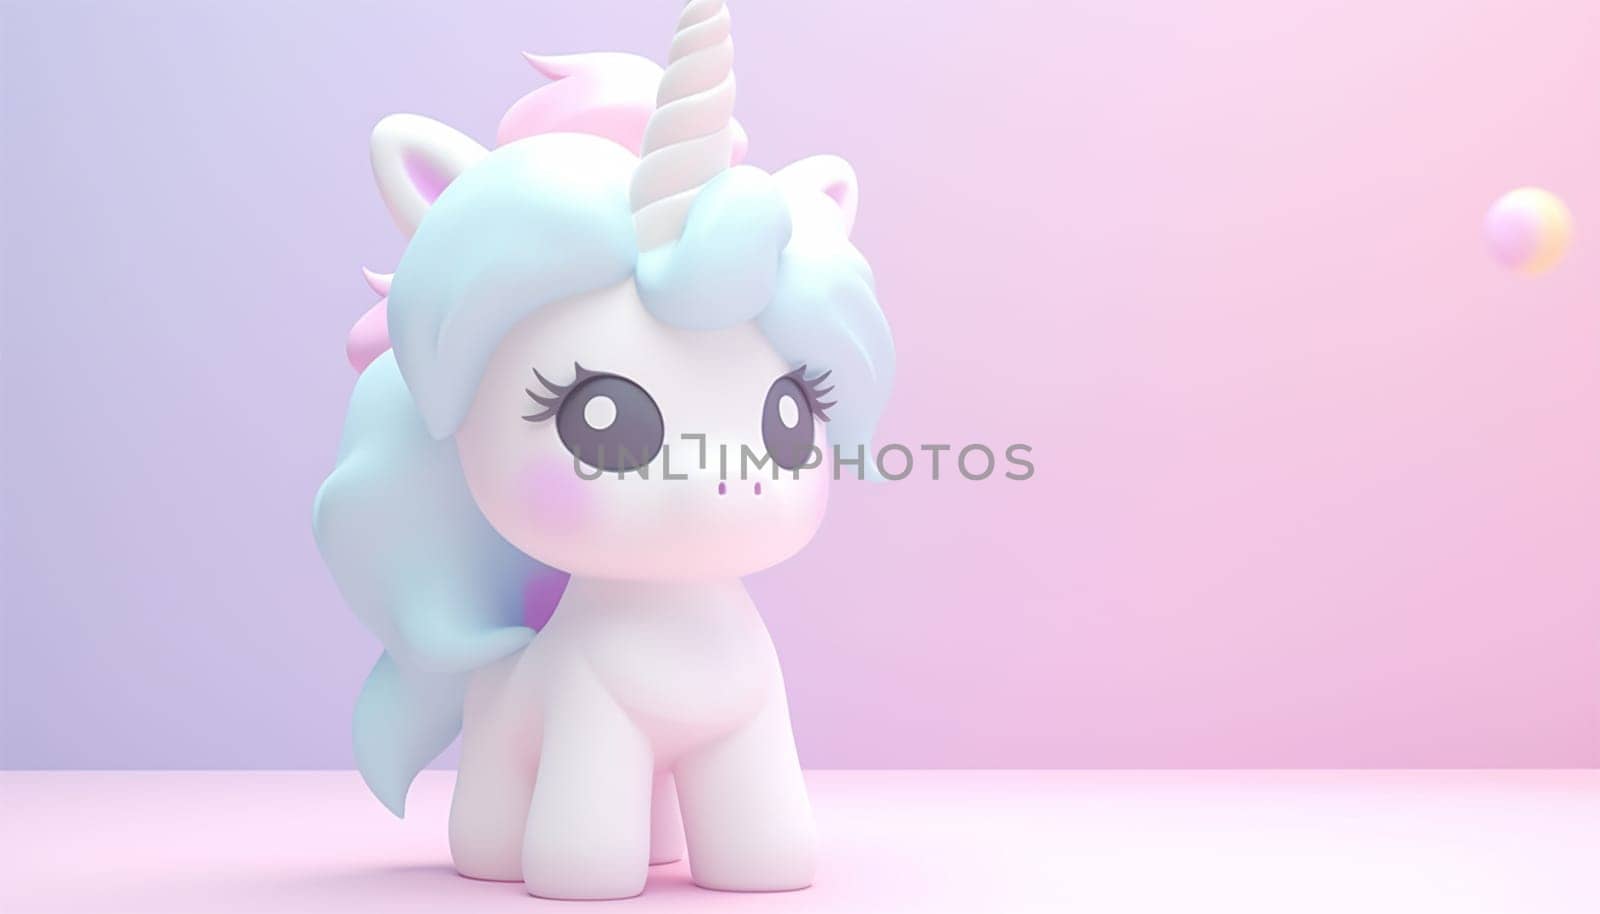 Cute unicorn pastel colored background. Magic fairy tale character unicorn 3d illustration for girls. Magic fairy tale unicorn print for clothes, stationery, books, goods. Toy Unicorn 3D character banner, background. Copy space by Annebel146